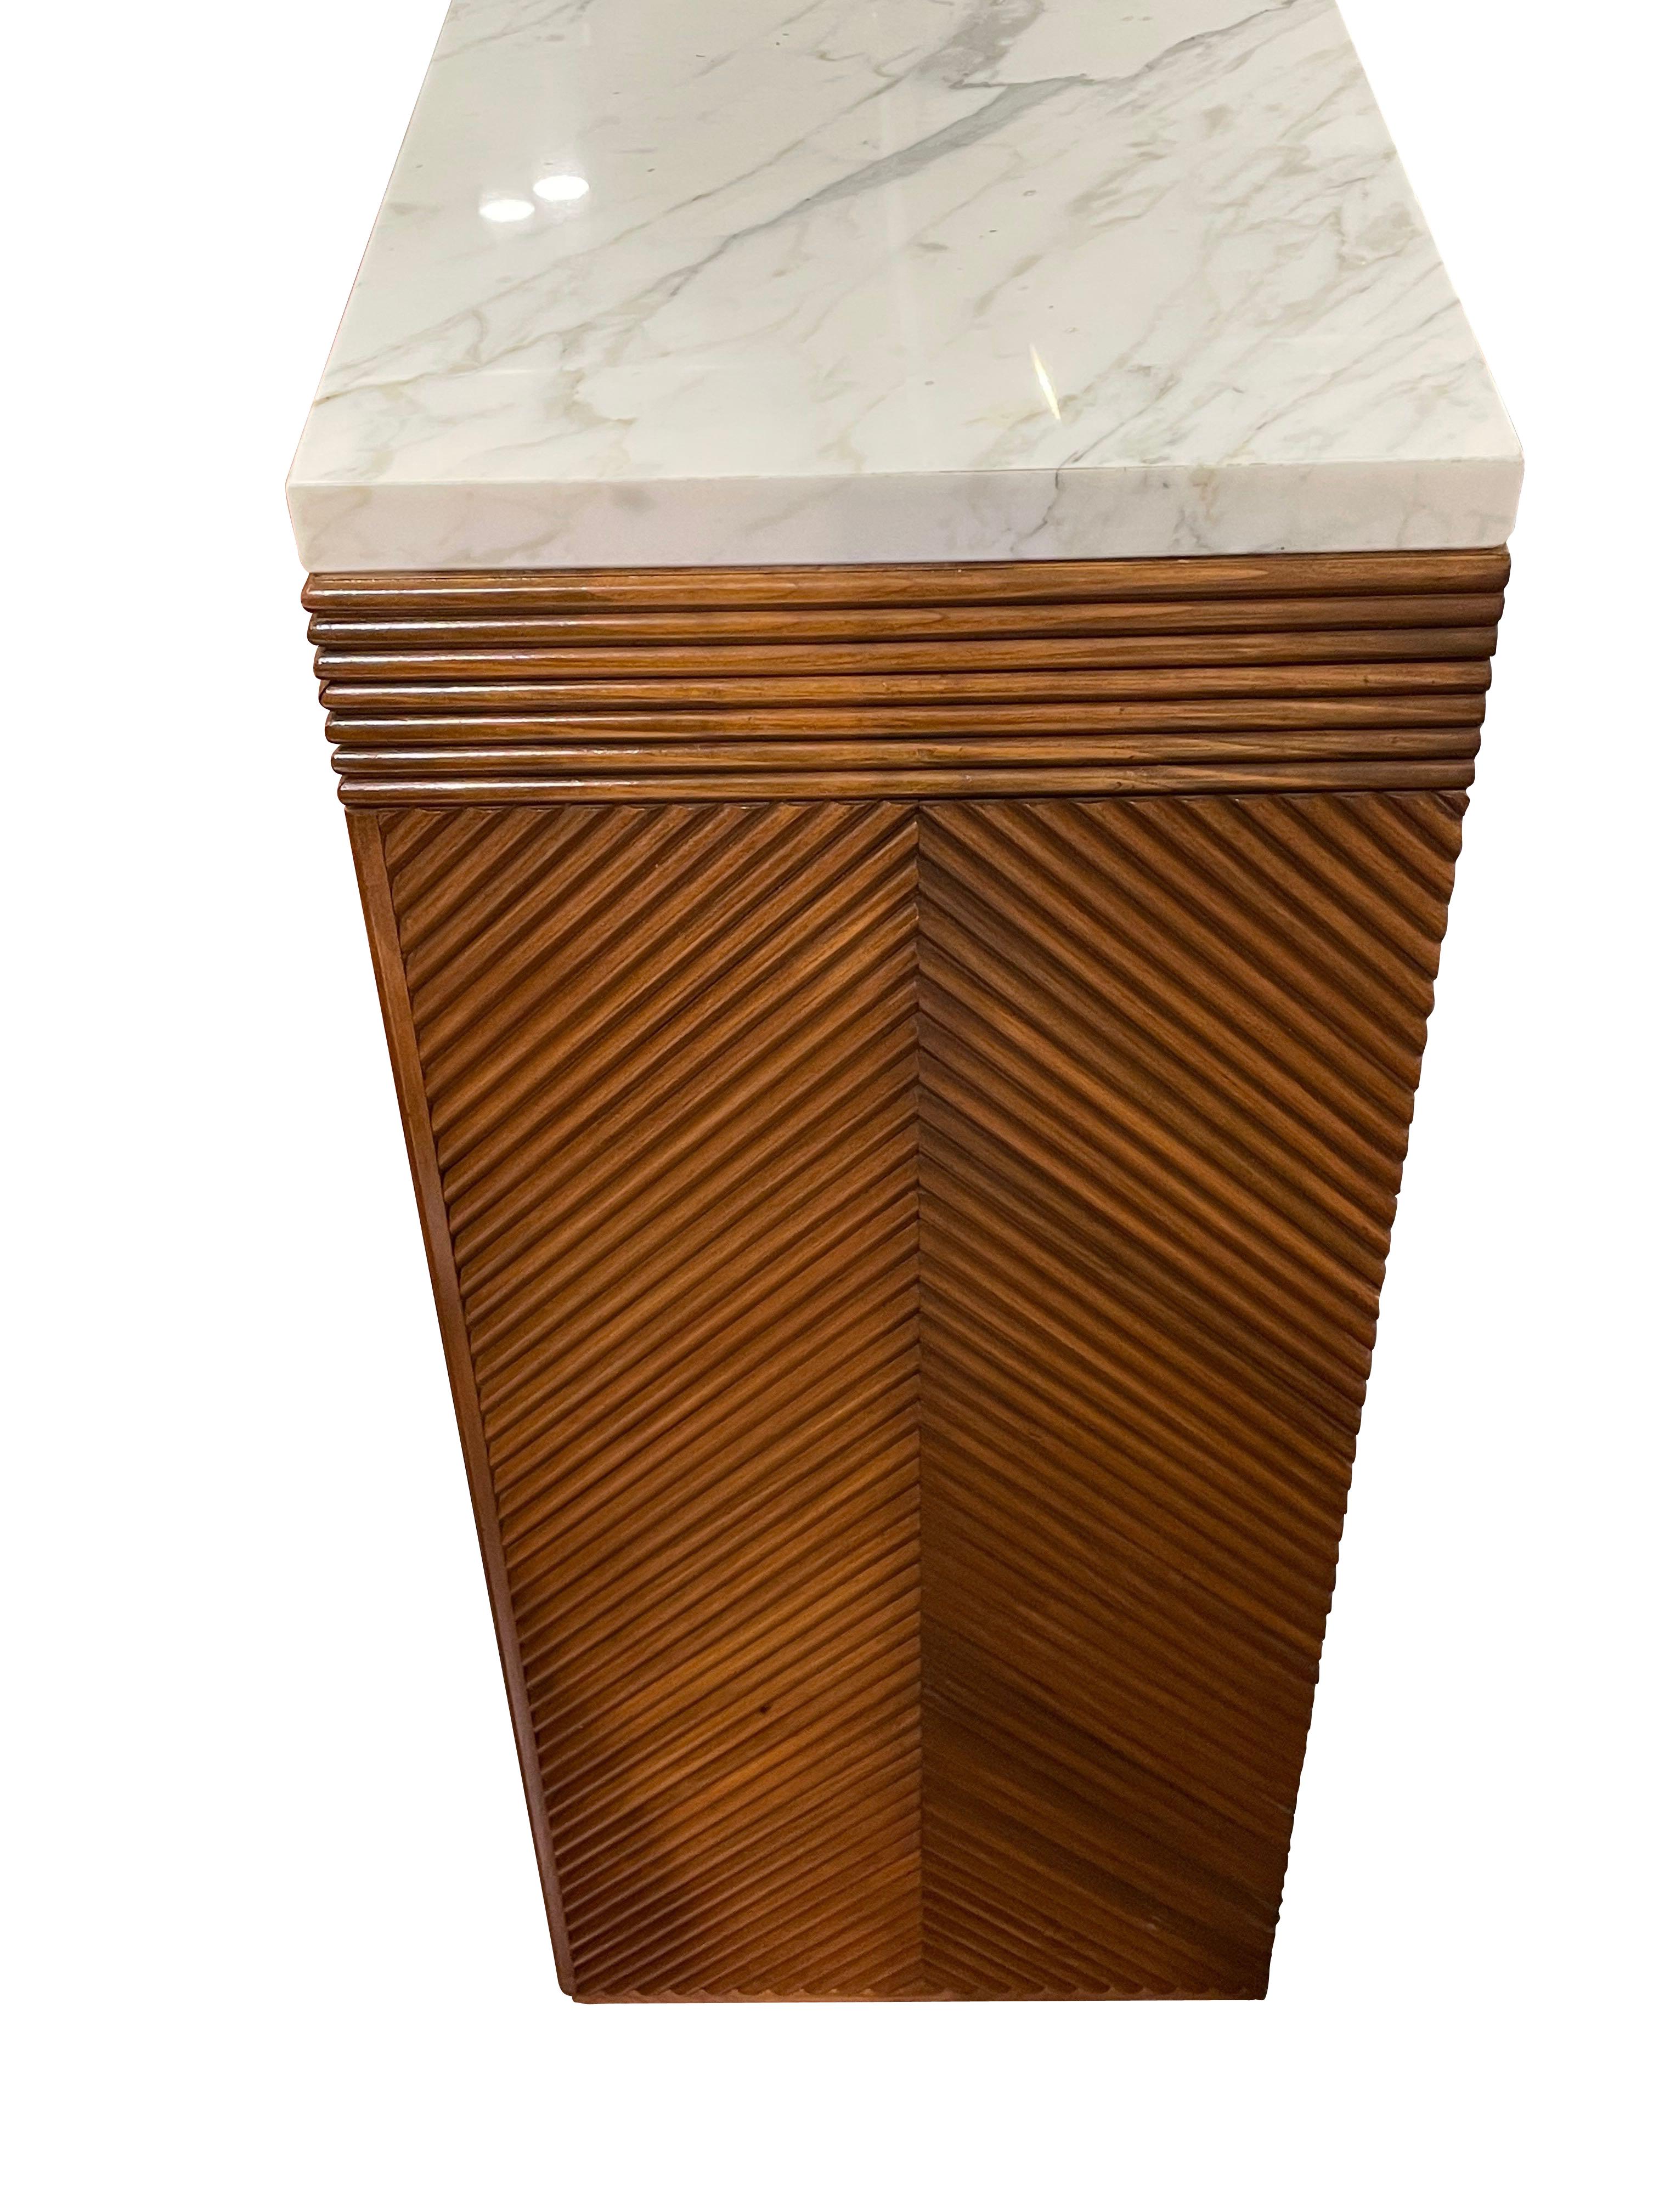 Italian Bamboo Mitered Sides, White Marble Top Console, Italy, Mid Century